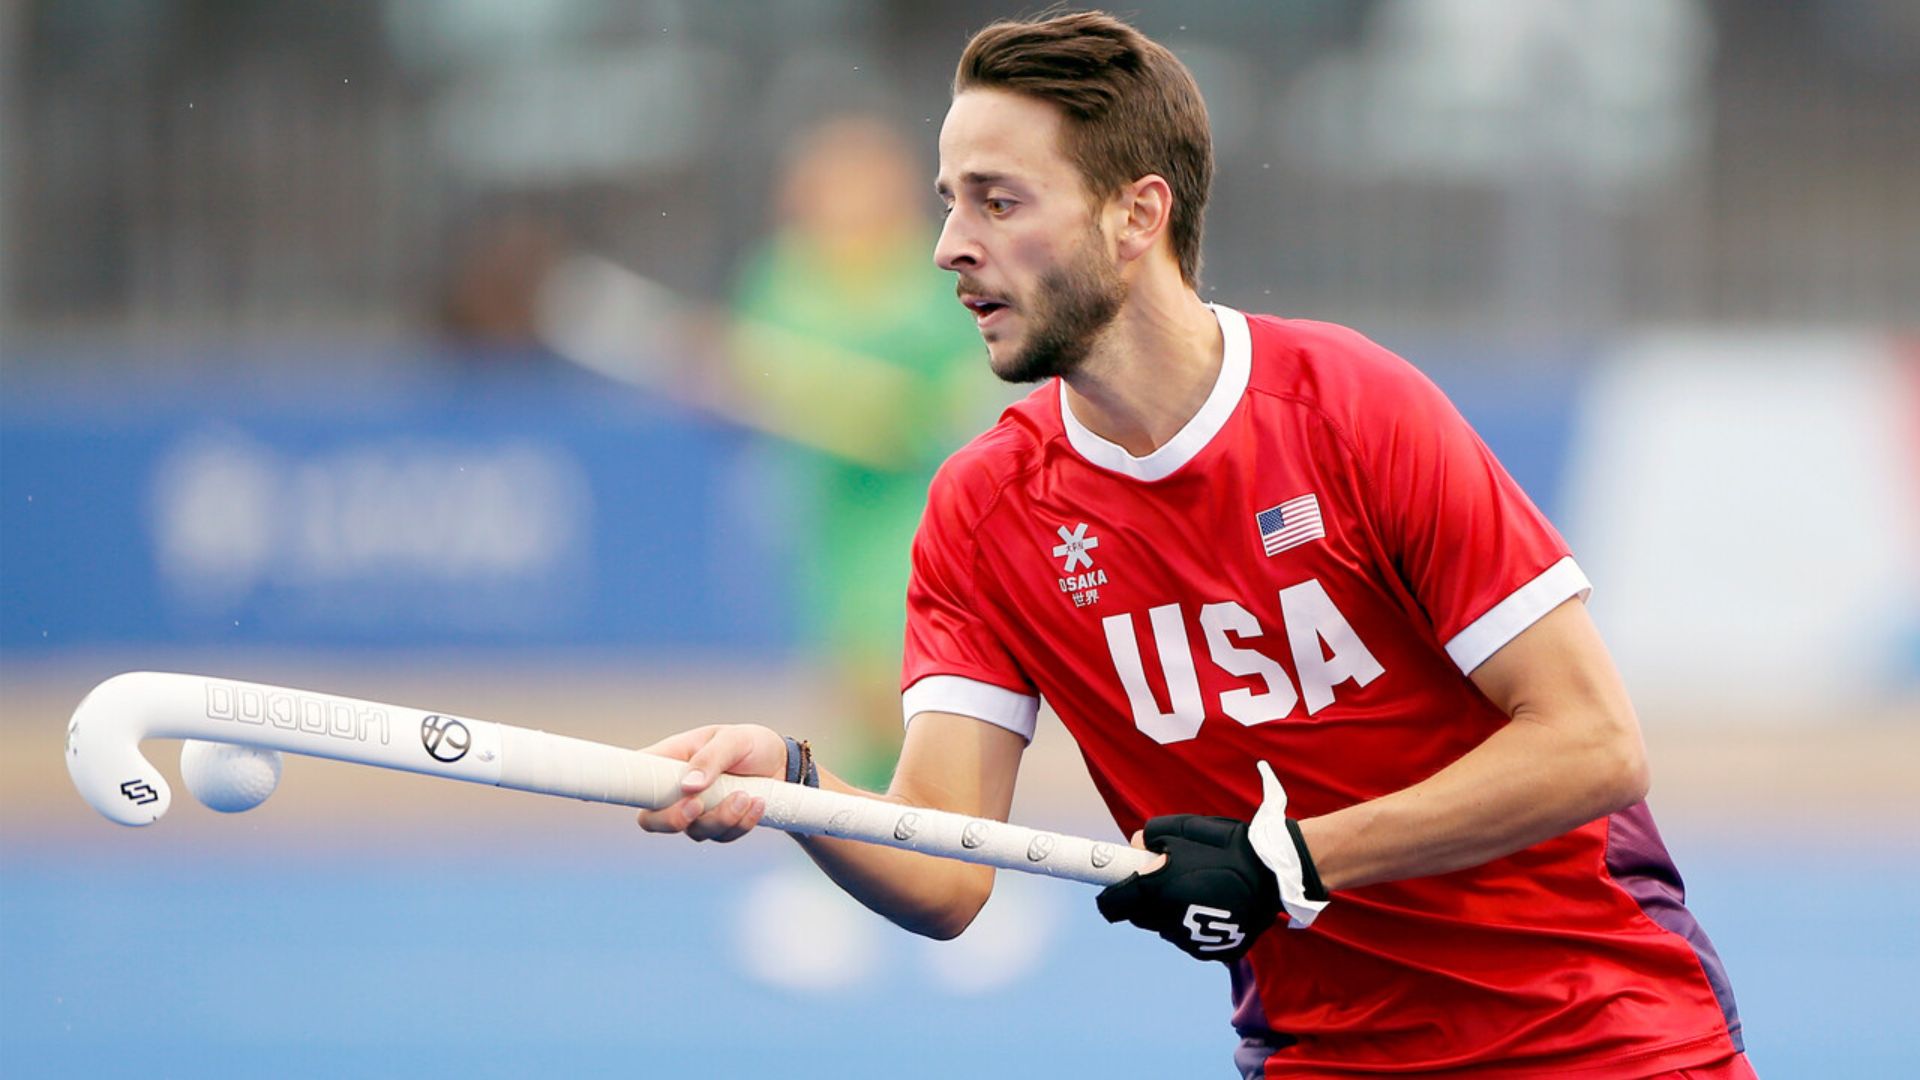 The United States has advanced to the field hockey semi-finals